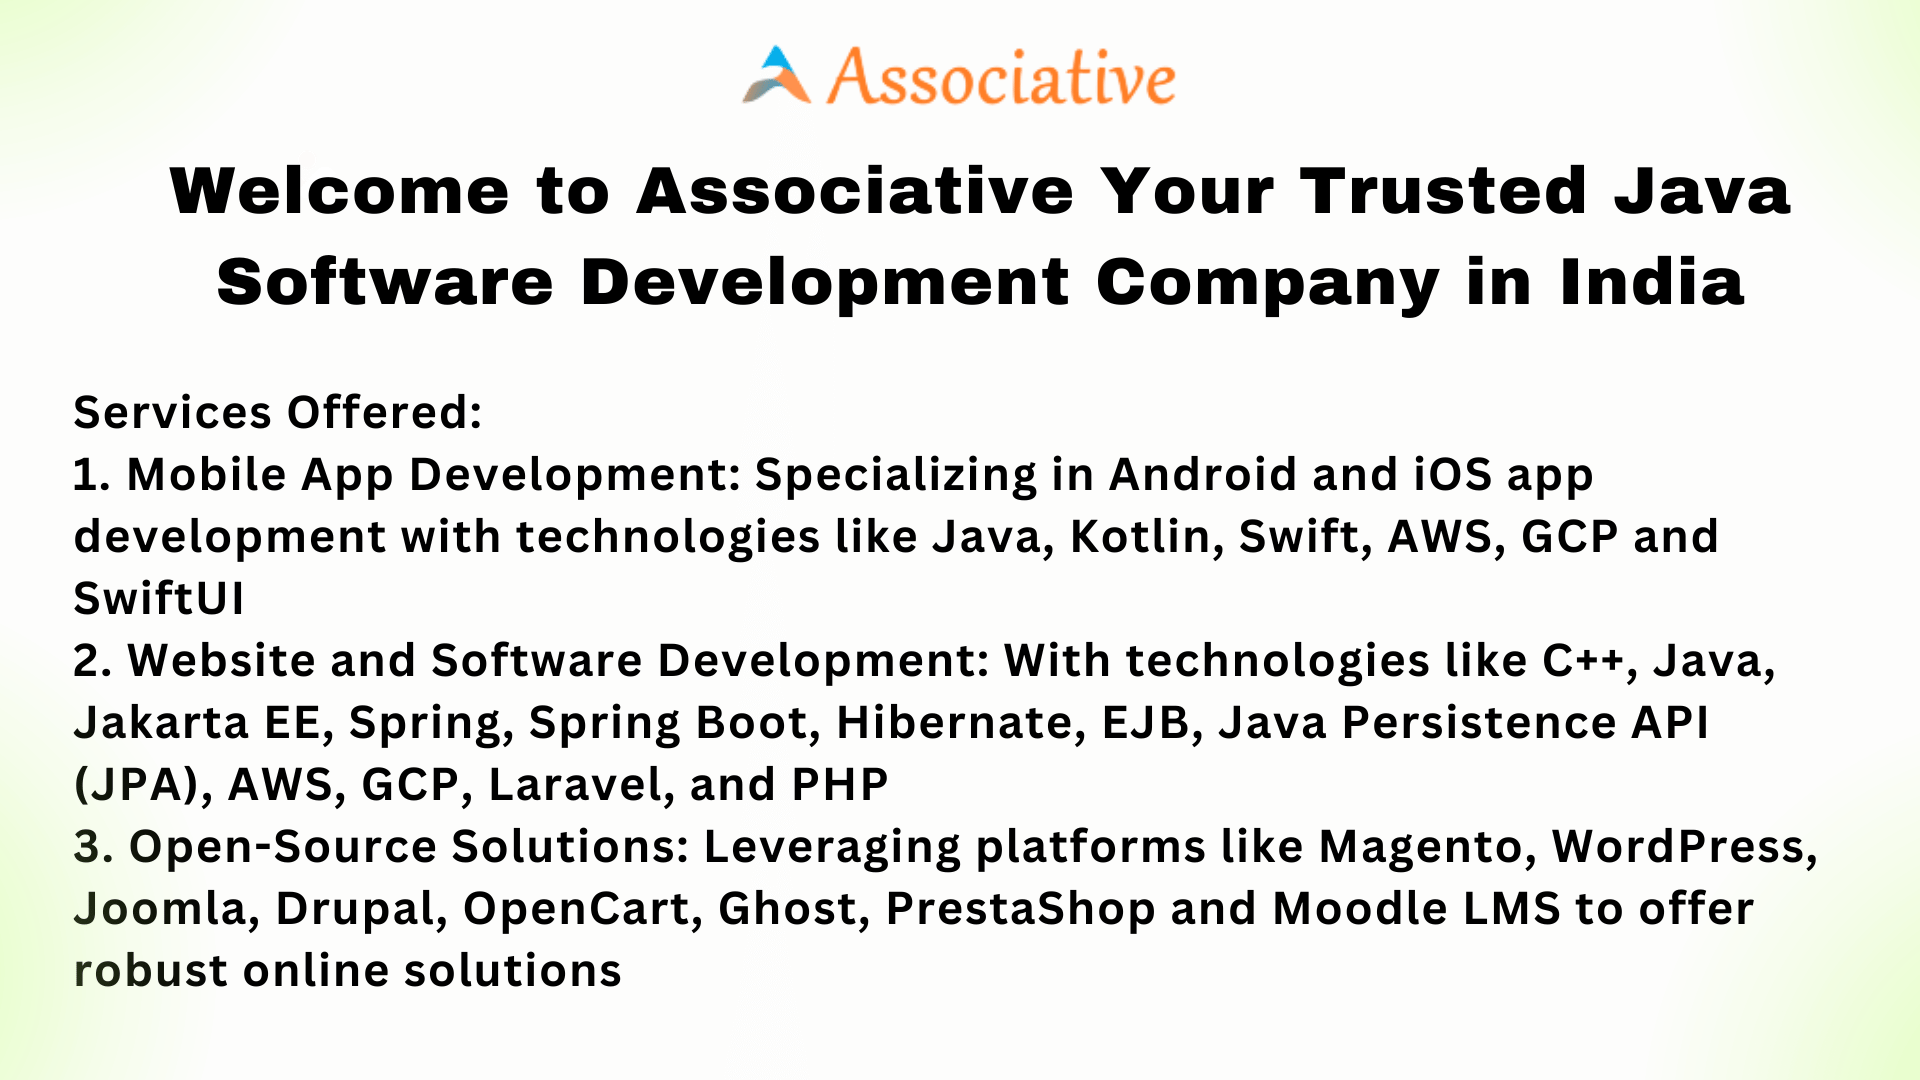 Welcome to Associative Your Trusted Java Software Development Company in India